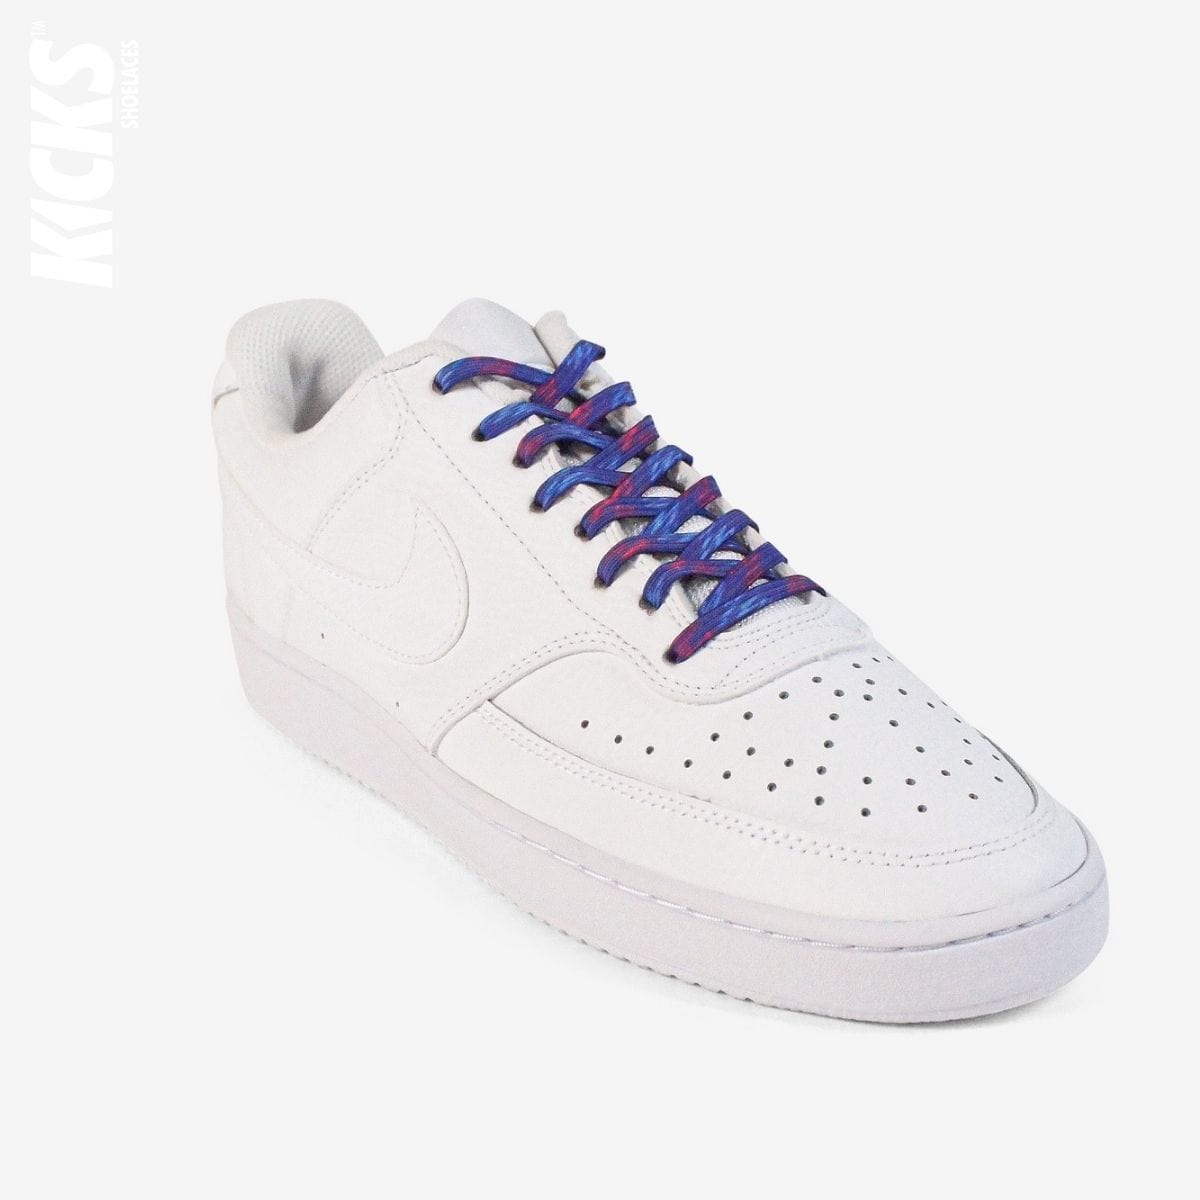 elastic-no-tie-shoelaces-with-blue-red-camo-laces-on-nike-white-sneakers